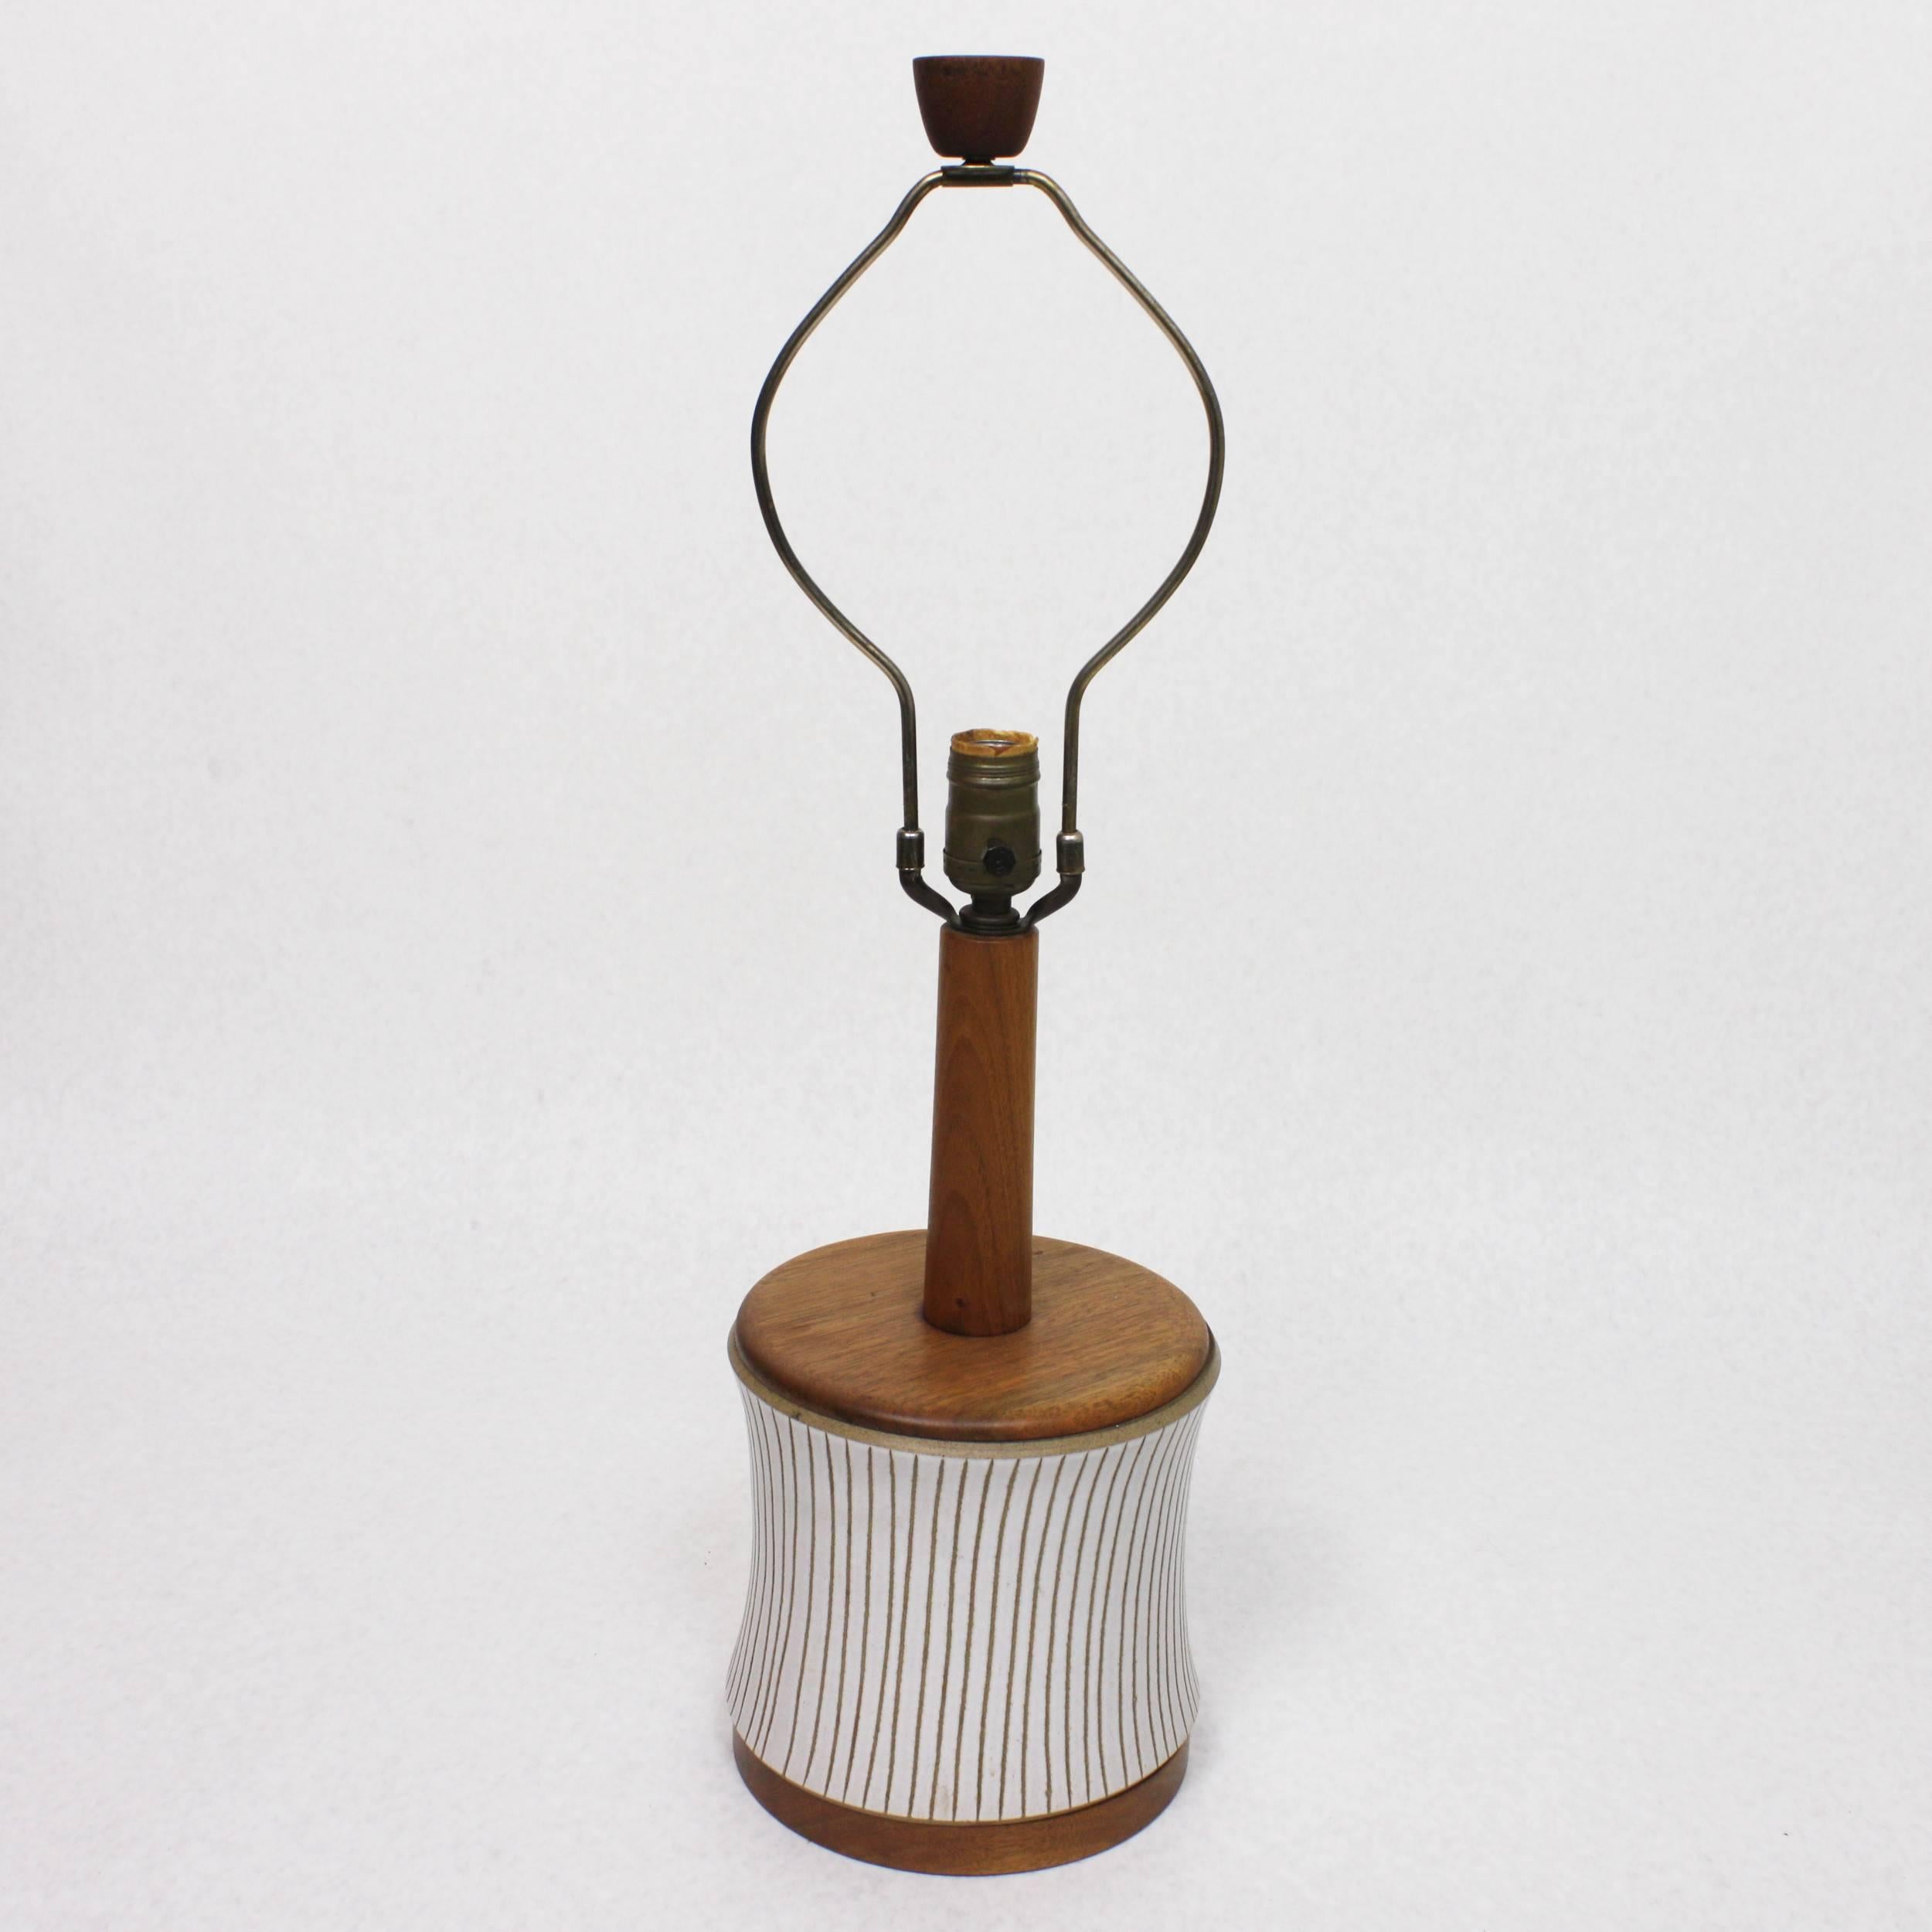 This wonderful model 218-28-D9 table lamp was designed by Gordon & Jane Martz and manufactured at their Marshall Studios facility in Veedersburg, IN. Lamp features an incised white and tan ceramic body with turned walnut, base, top, neck and finial.